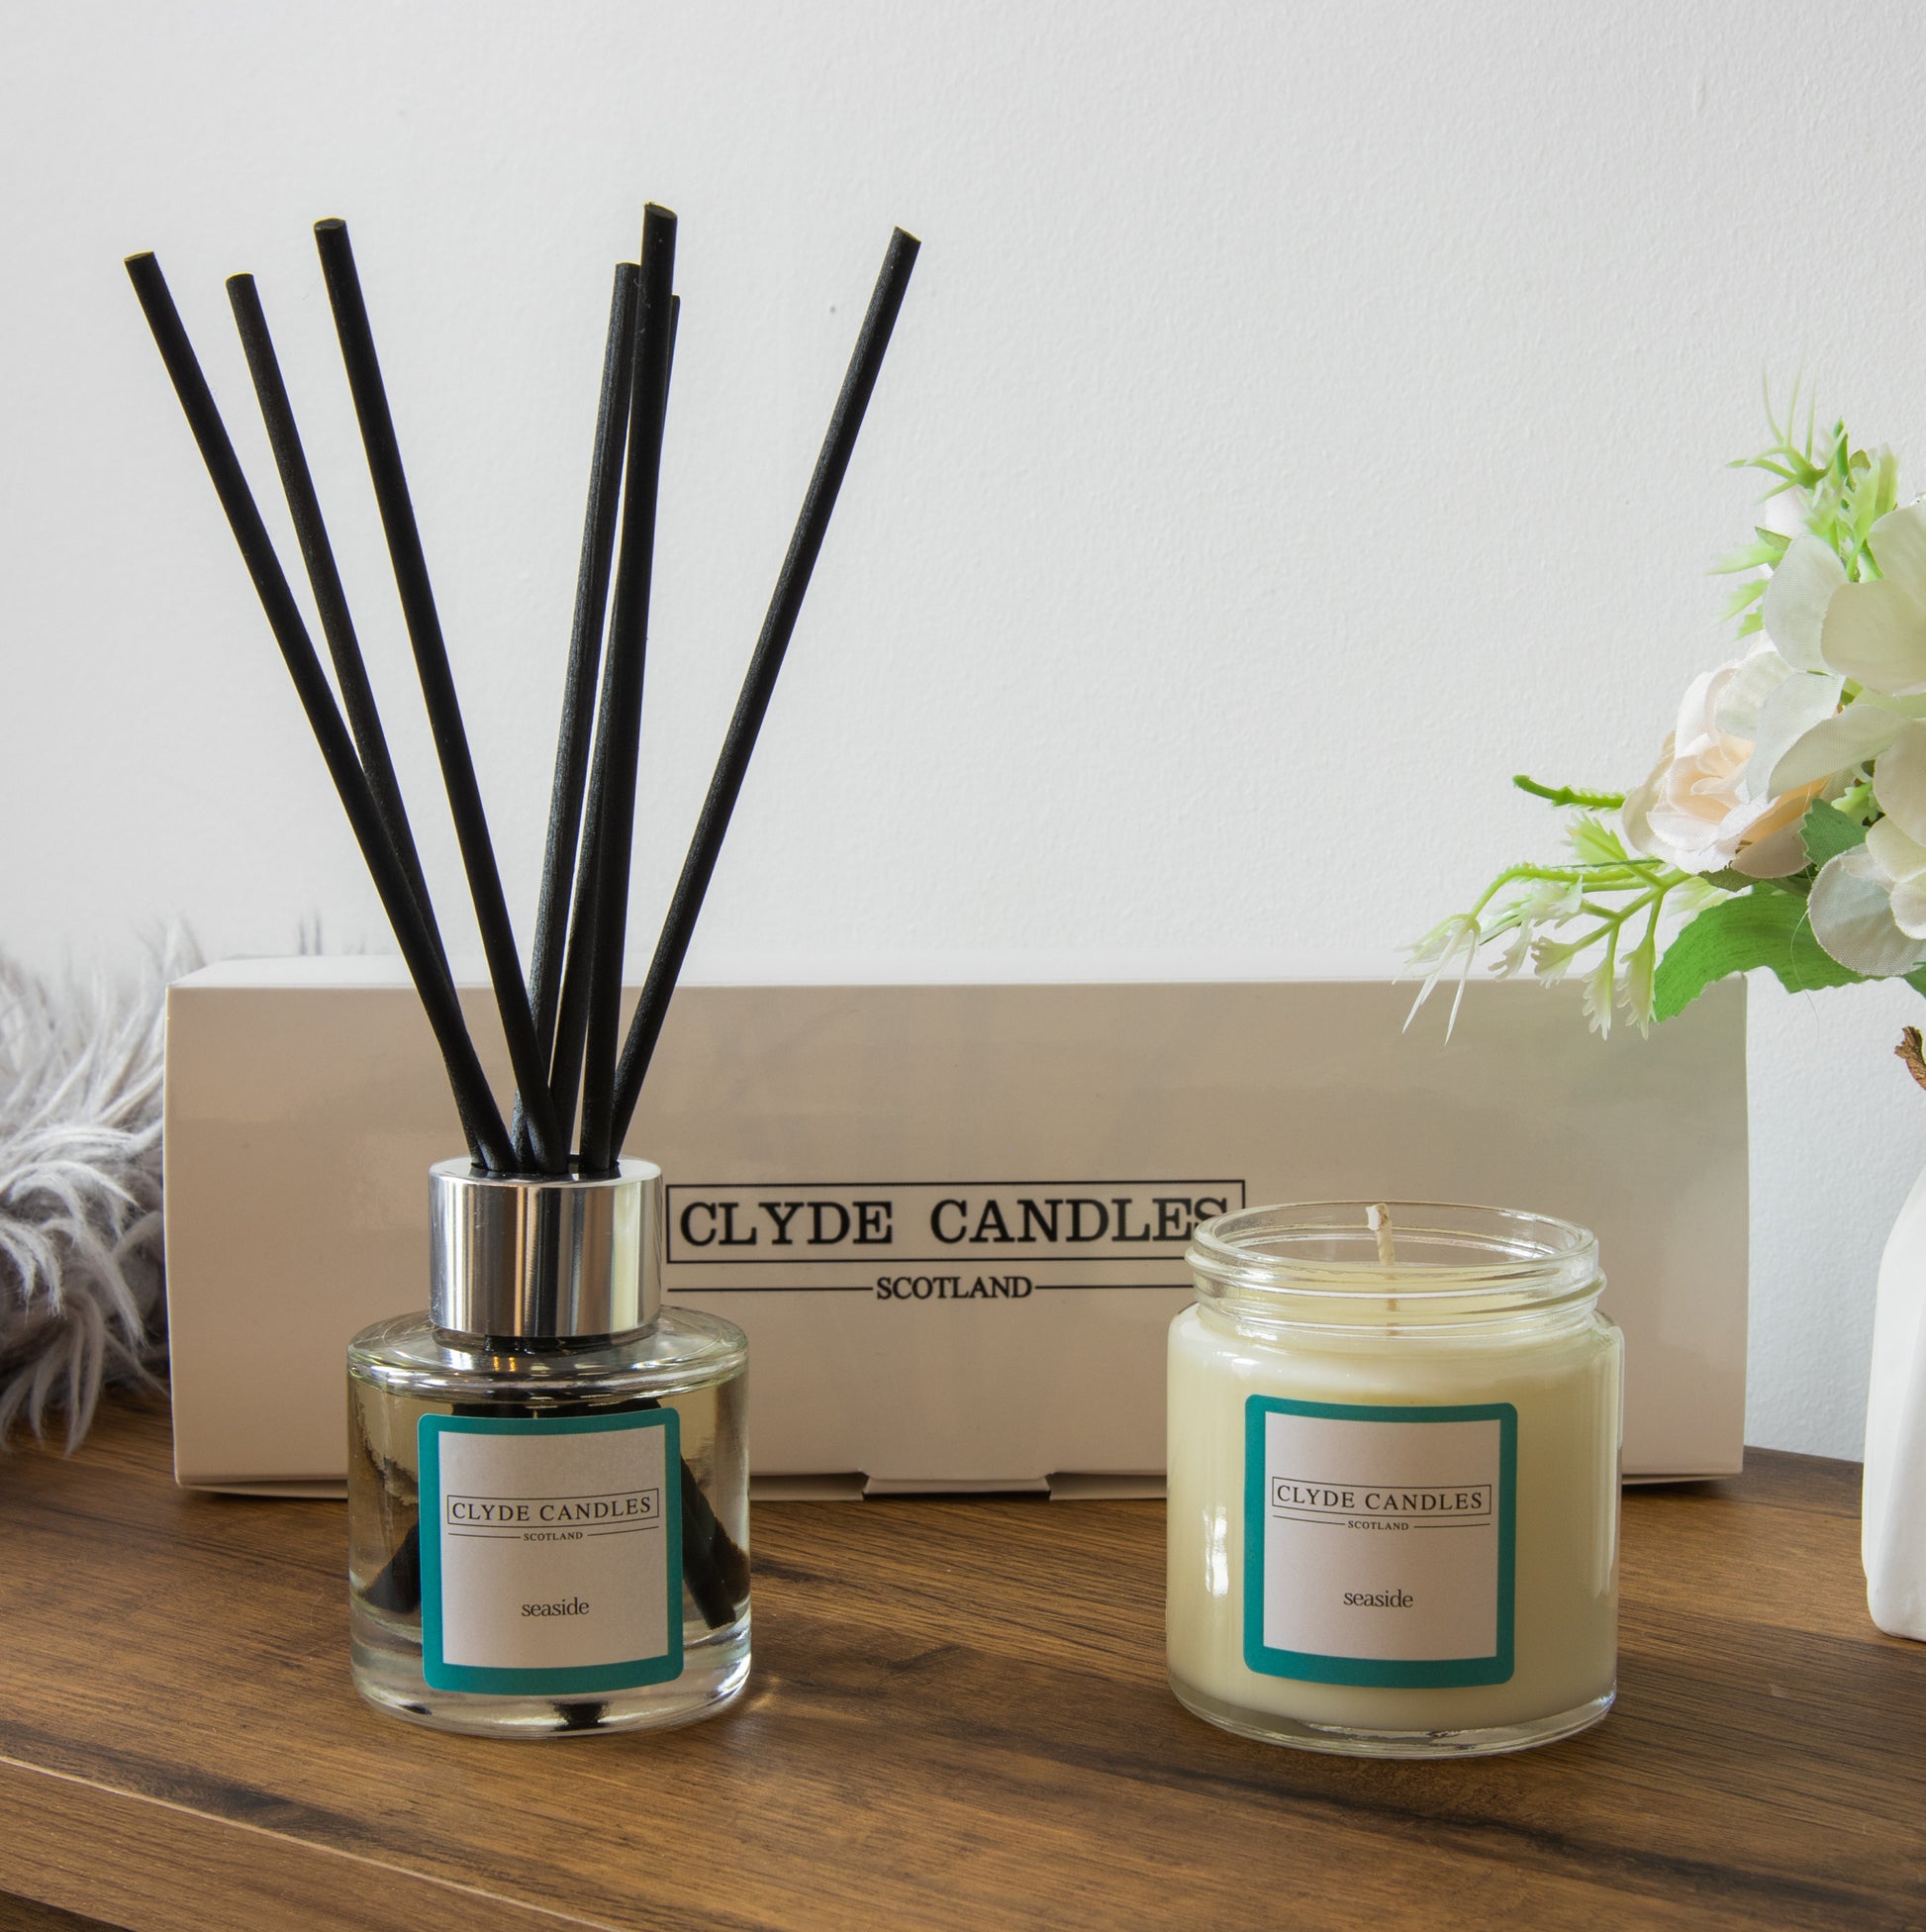 Seaside Diffuser & Candle Gift Box Set - Clyde Candles, 50ml Luxury Diffuser Oil with a Set of 7 Fibre Sticks & a Natural Soy Candle 120g Jar, Best Aroma Scent for Home, Kitchen, Living Room, Bathroom. Fragrance Diffusers set with sticks